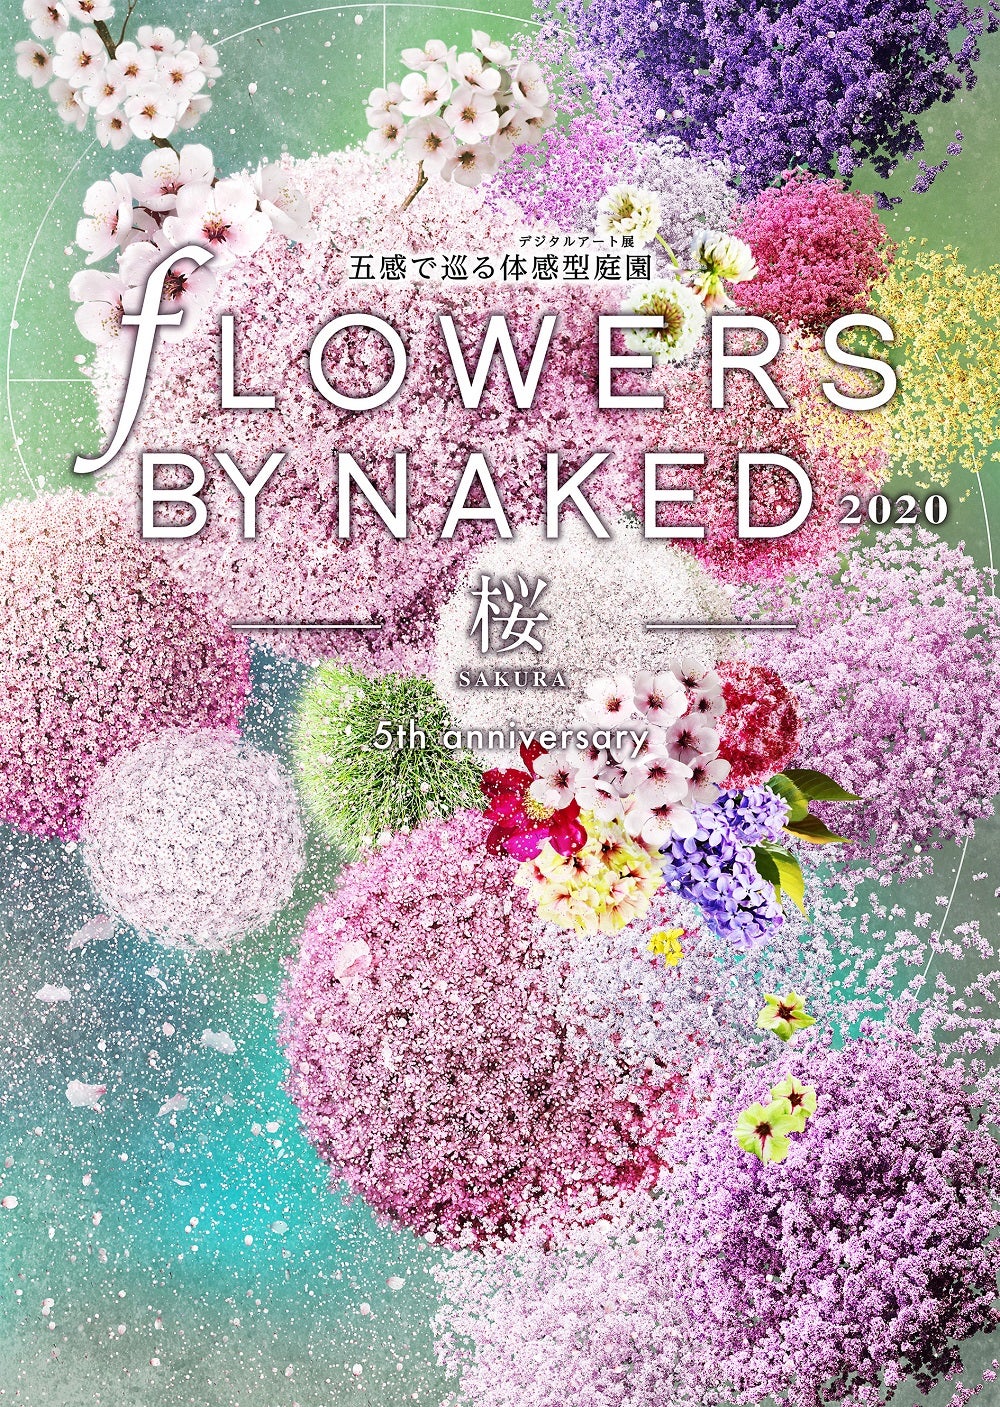 FLOWERS BY NAKED 2020 ー桜ー／画像提供：ネイキッド